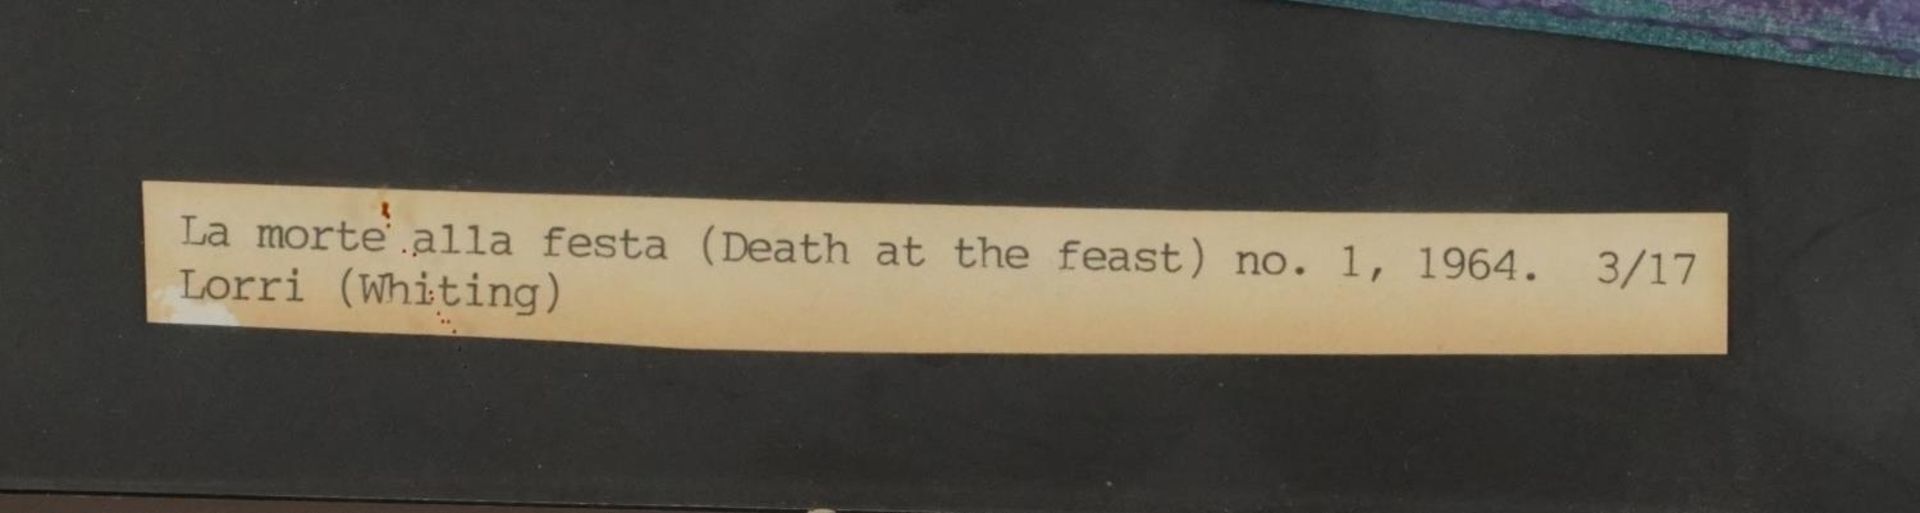 Lorri Whiting 1964 - Death at the Feast, mixed media on paper numbered 3/17, framed and glazed, 33cm - Image 3 of 5